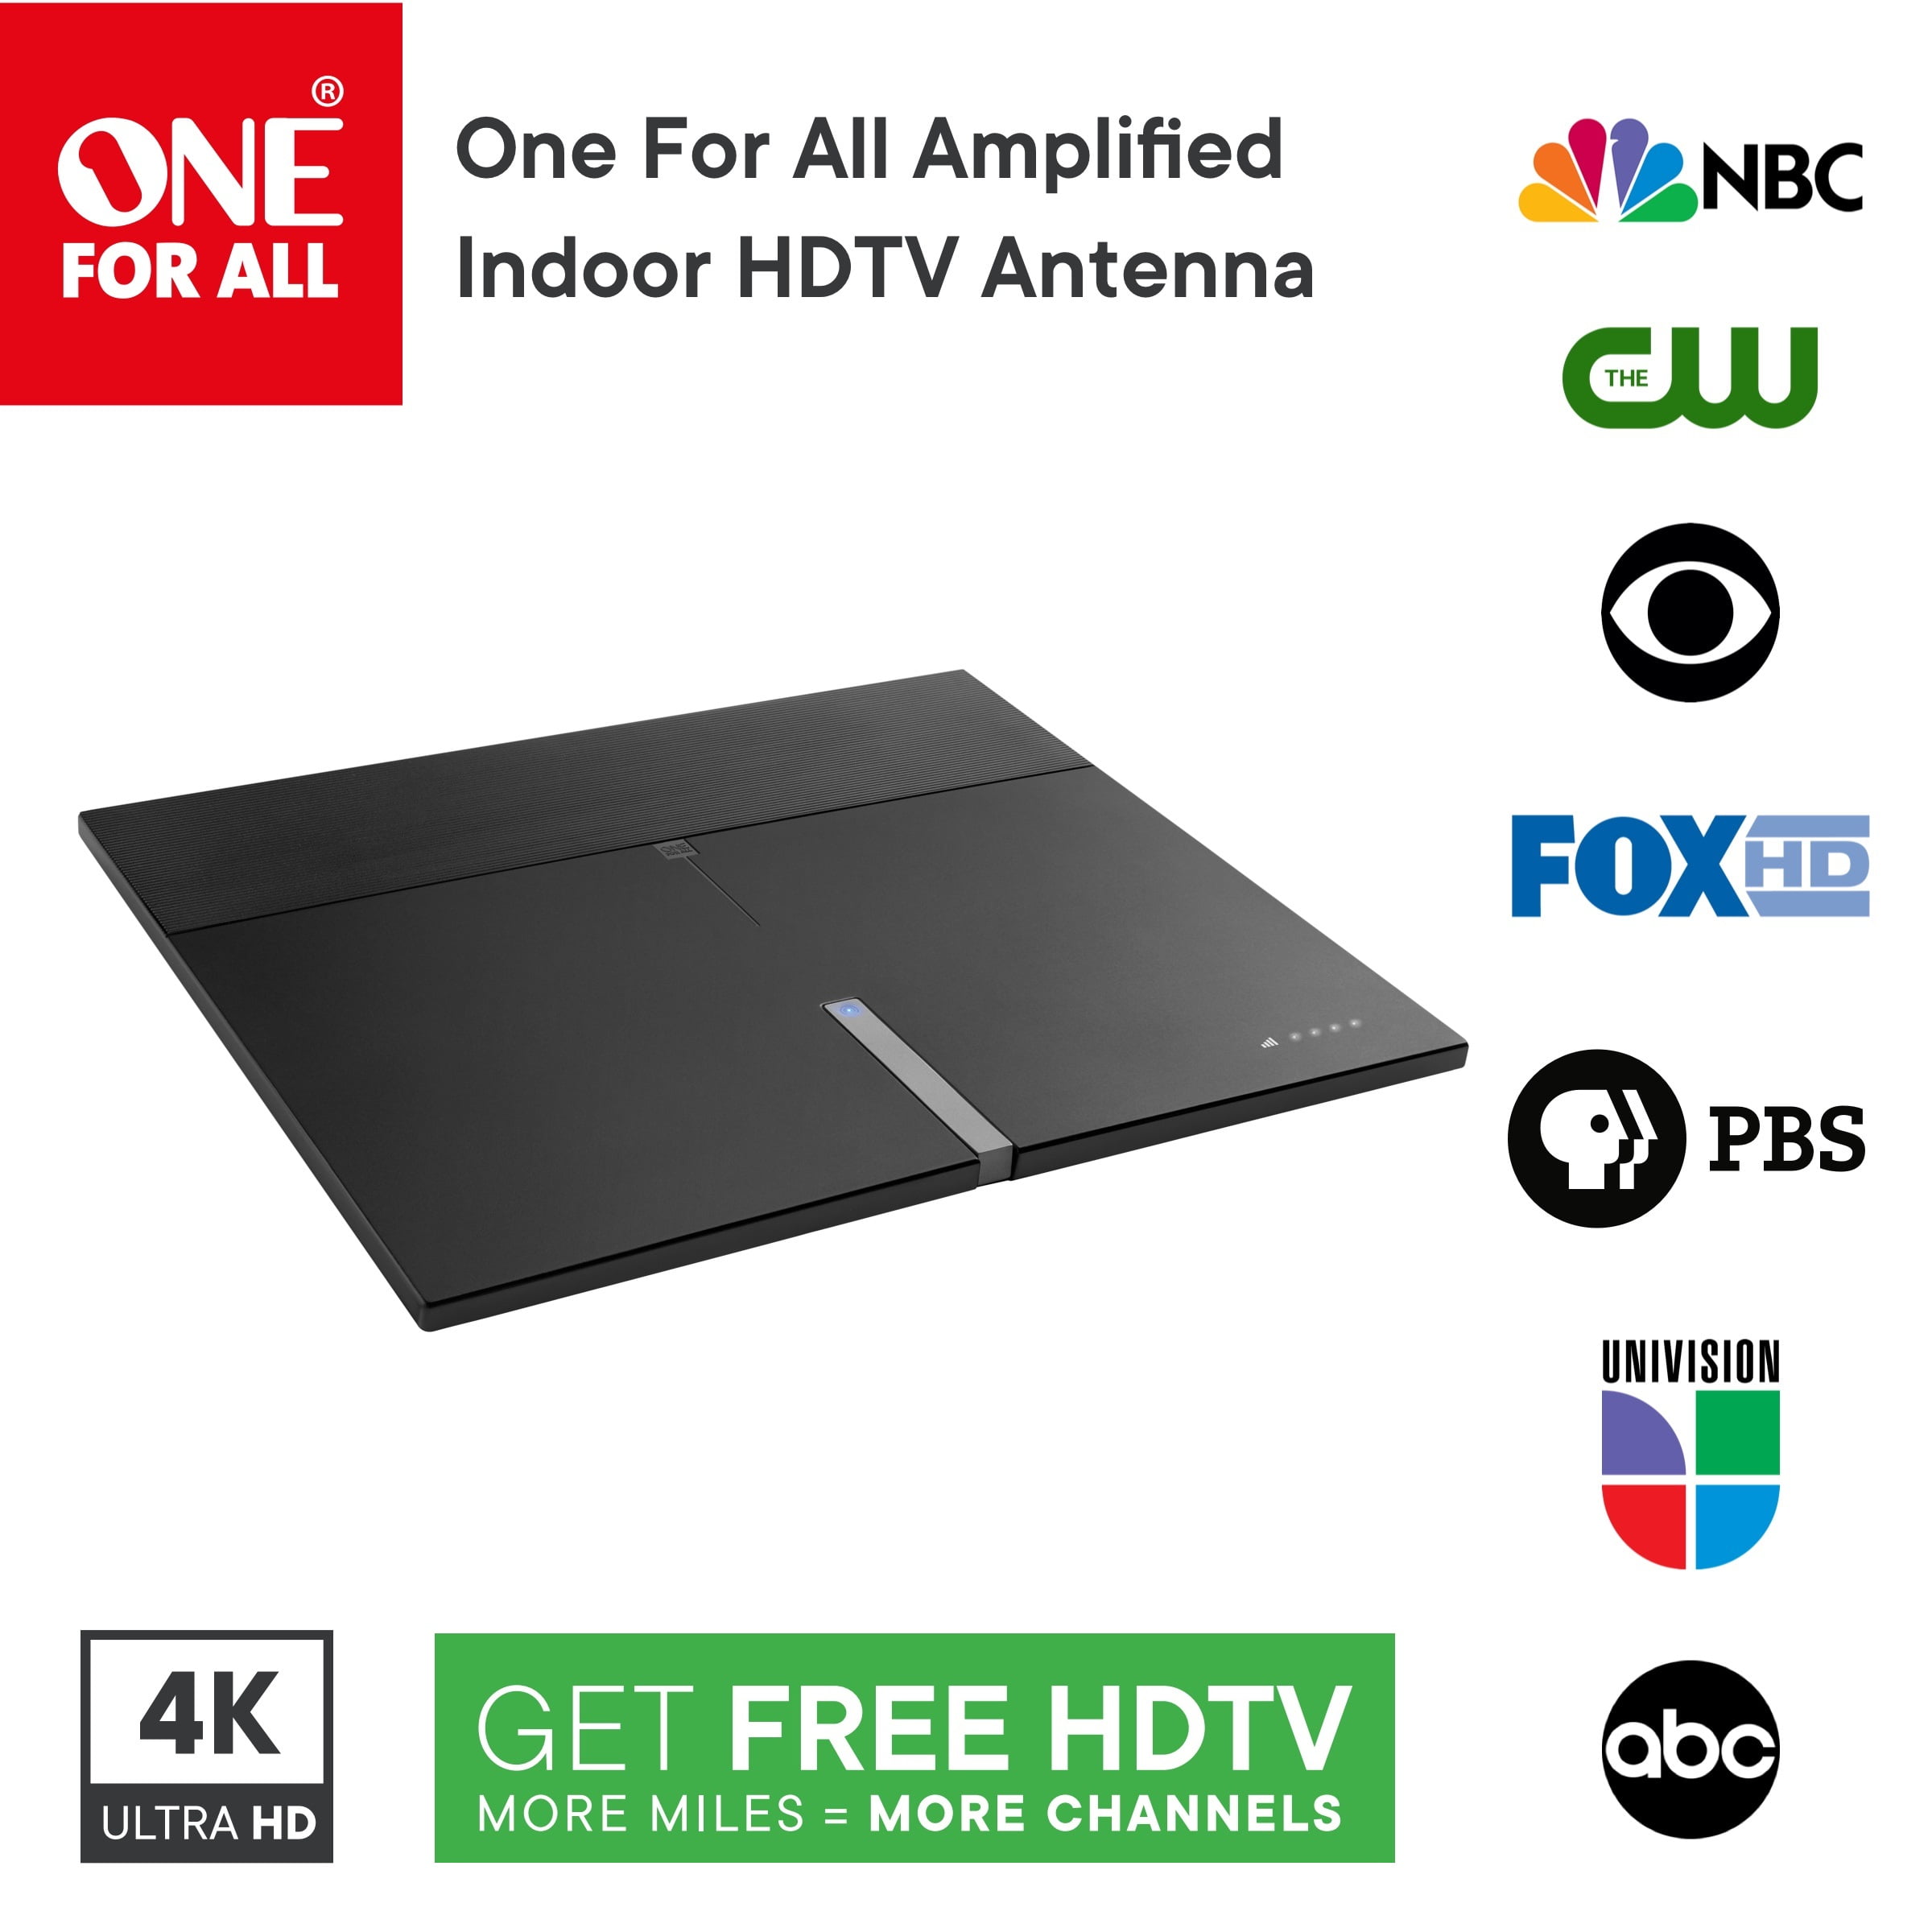 High Performance Coaxial Cable RHTA-18002 Rosewill HDTV Antenna 4K and ATSC3.0 Ready Indoor TV Antenna Range up to 60 Miles with Amplifier Signal Booster 